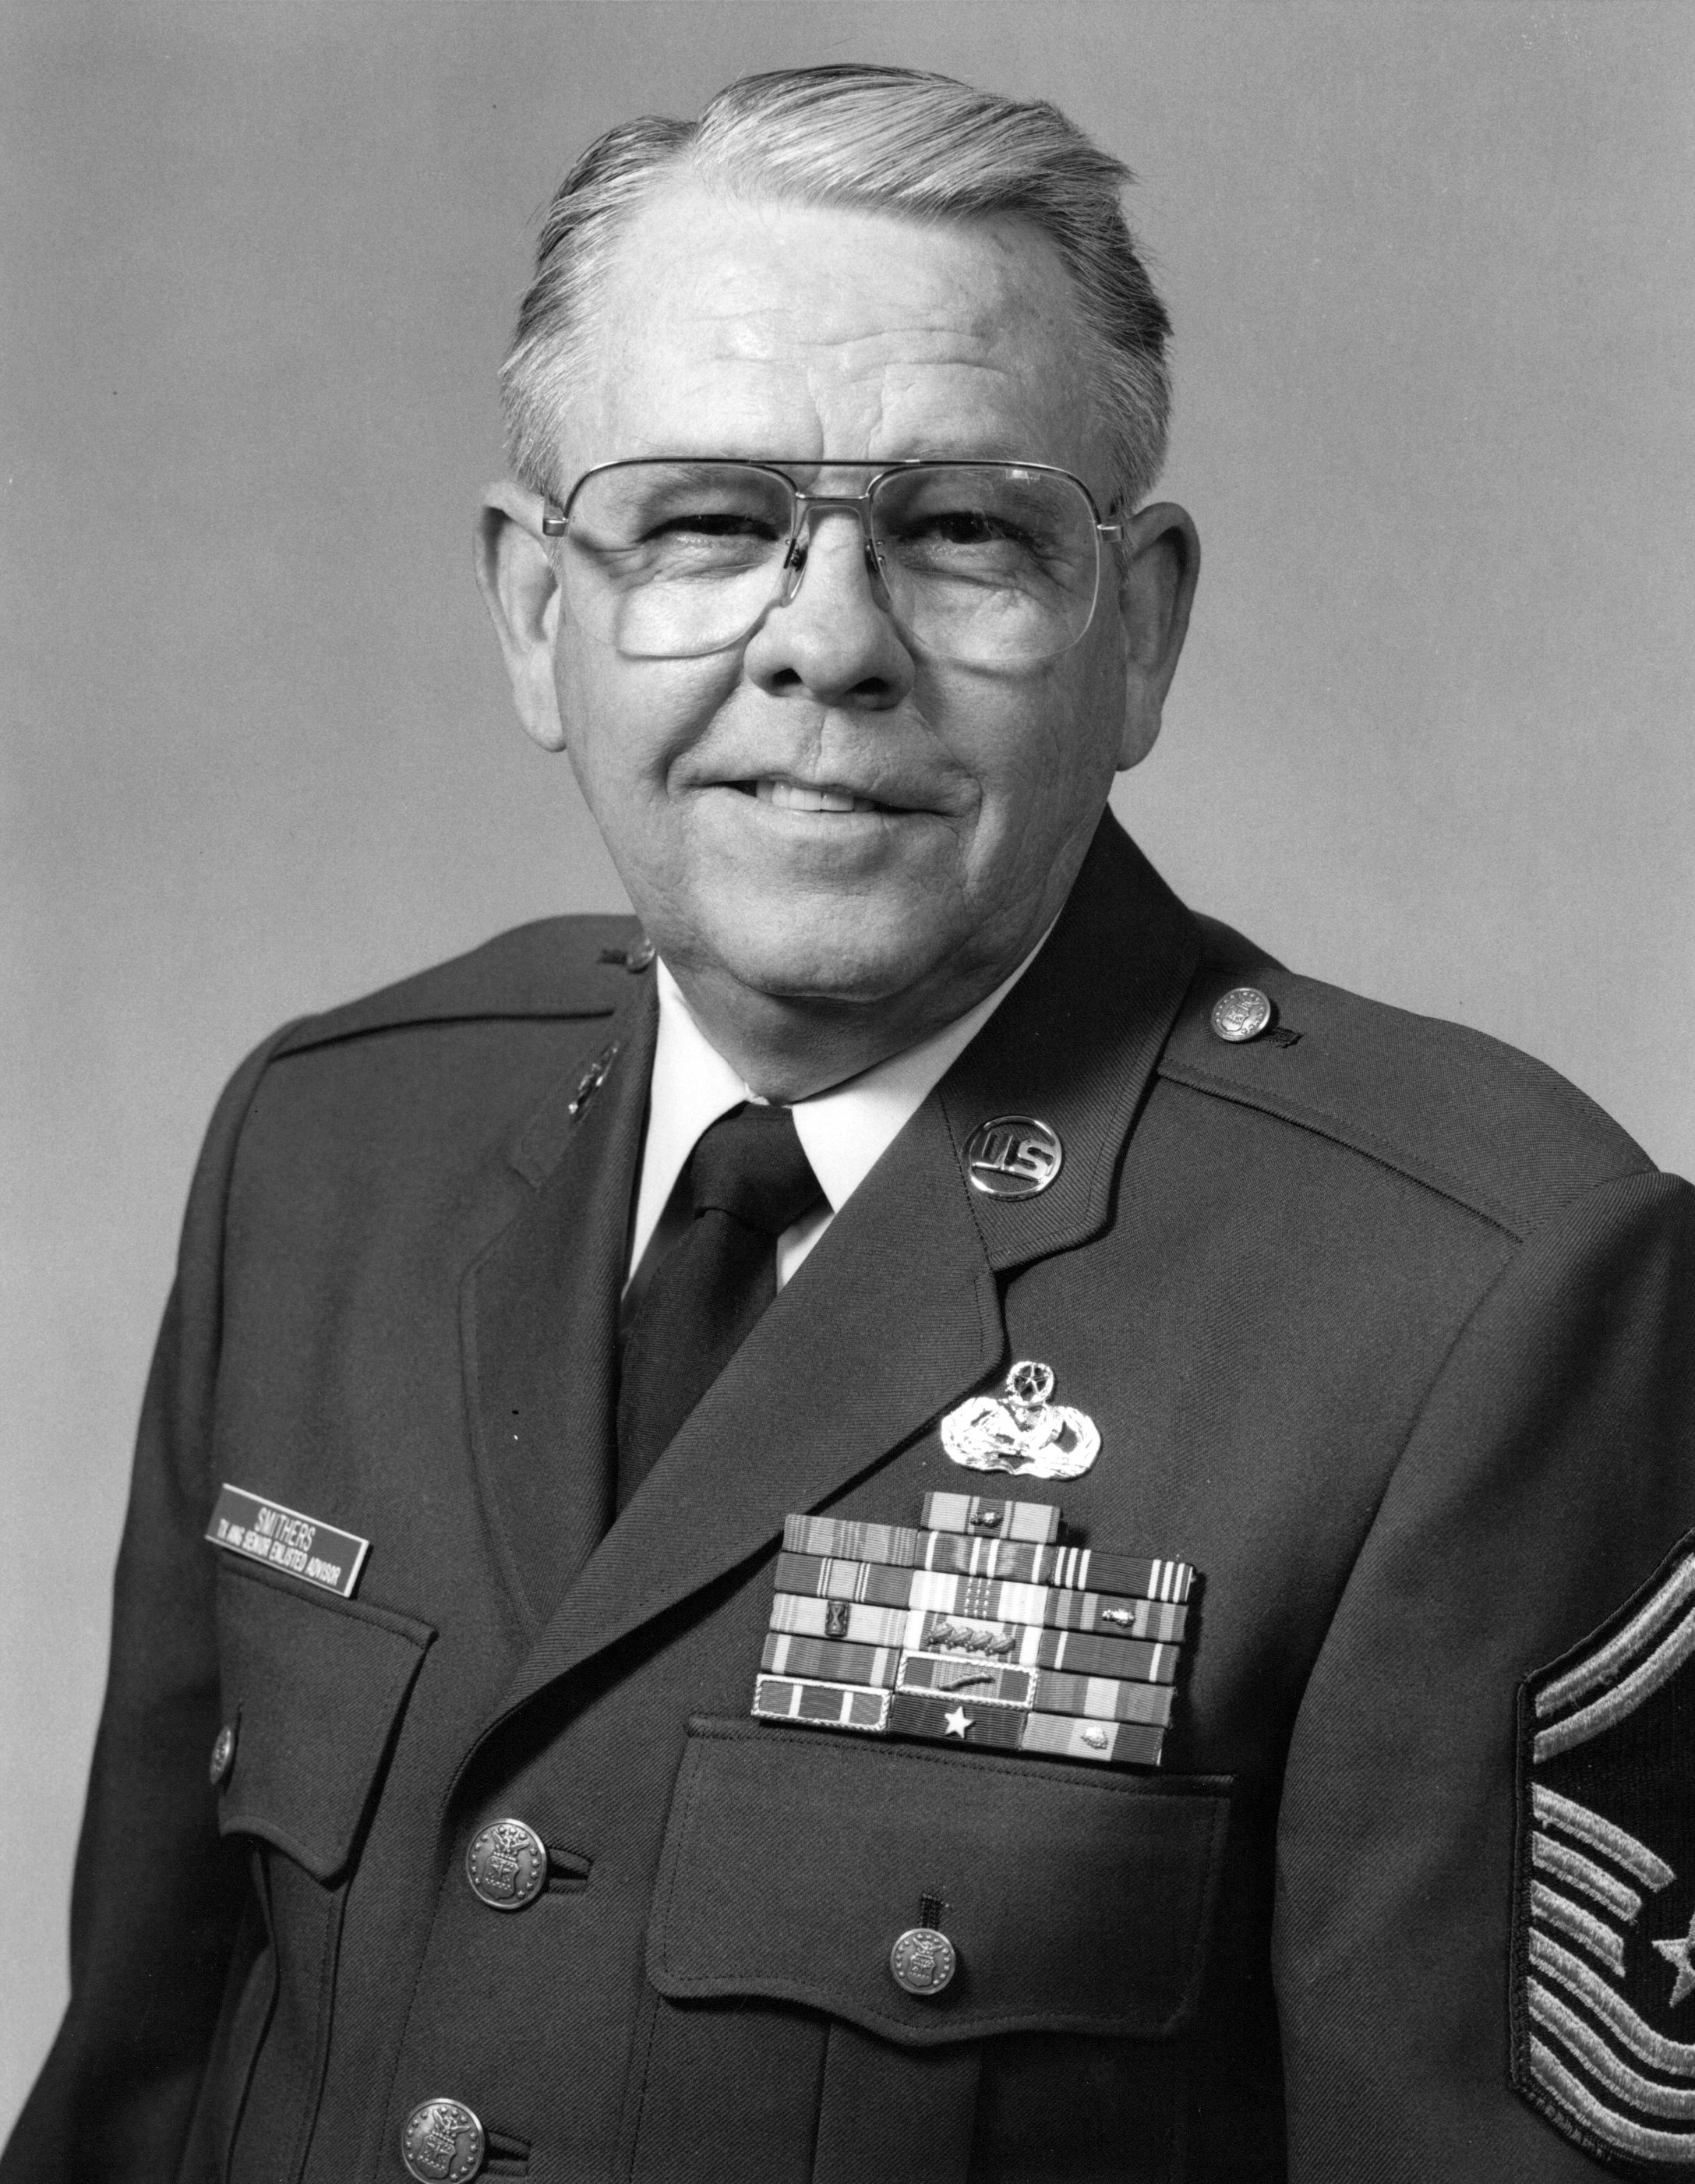 Chief Master Sergeant Donald L. Smithers